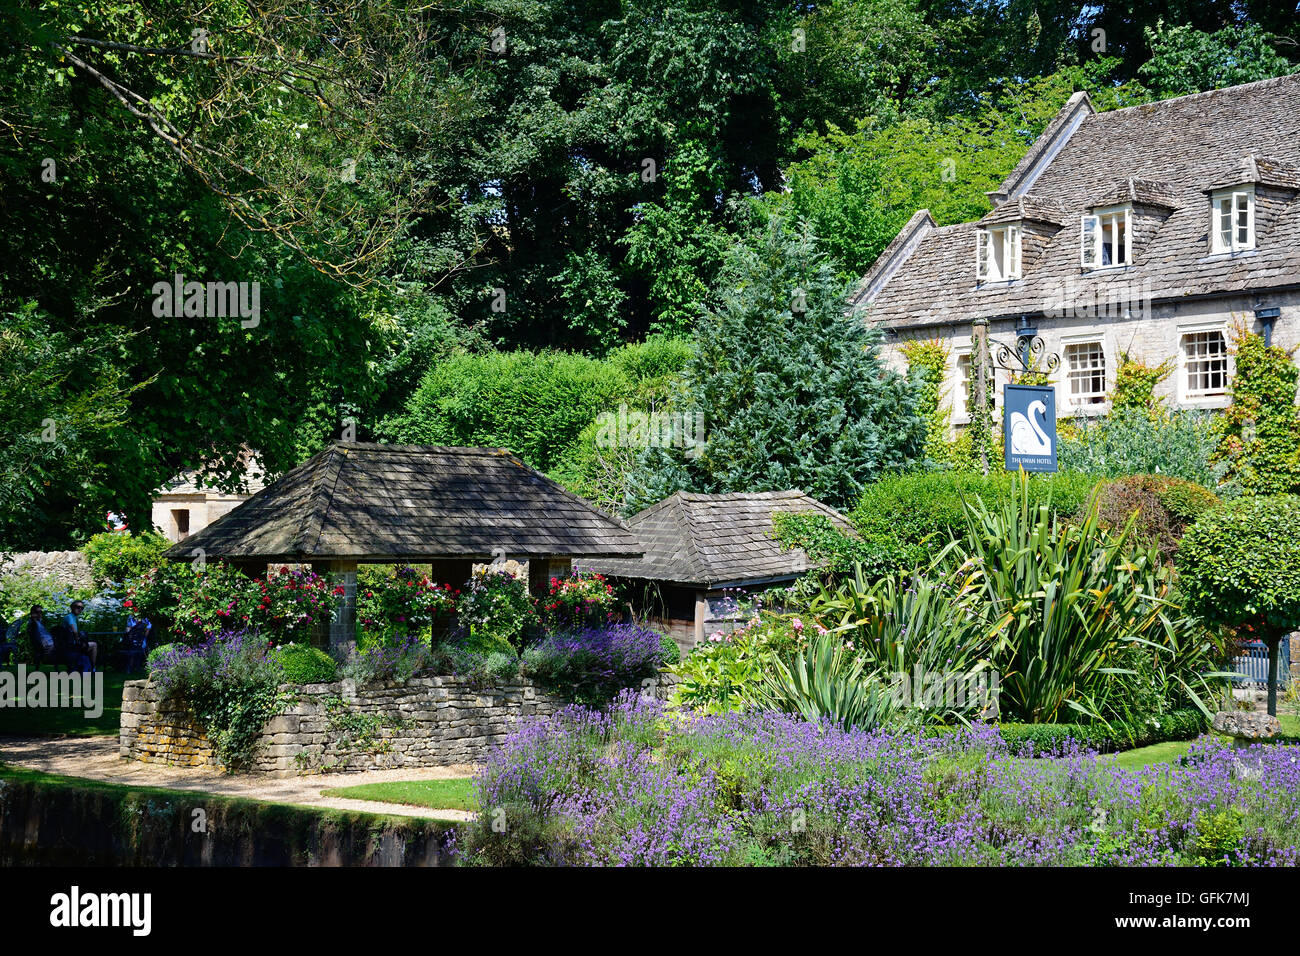 View across the trout farm garden towards The Swan Hotel, Bibury, Cotswolds, Gloucestershire, England, UK, Western Europe. Stock Photo